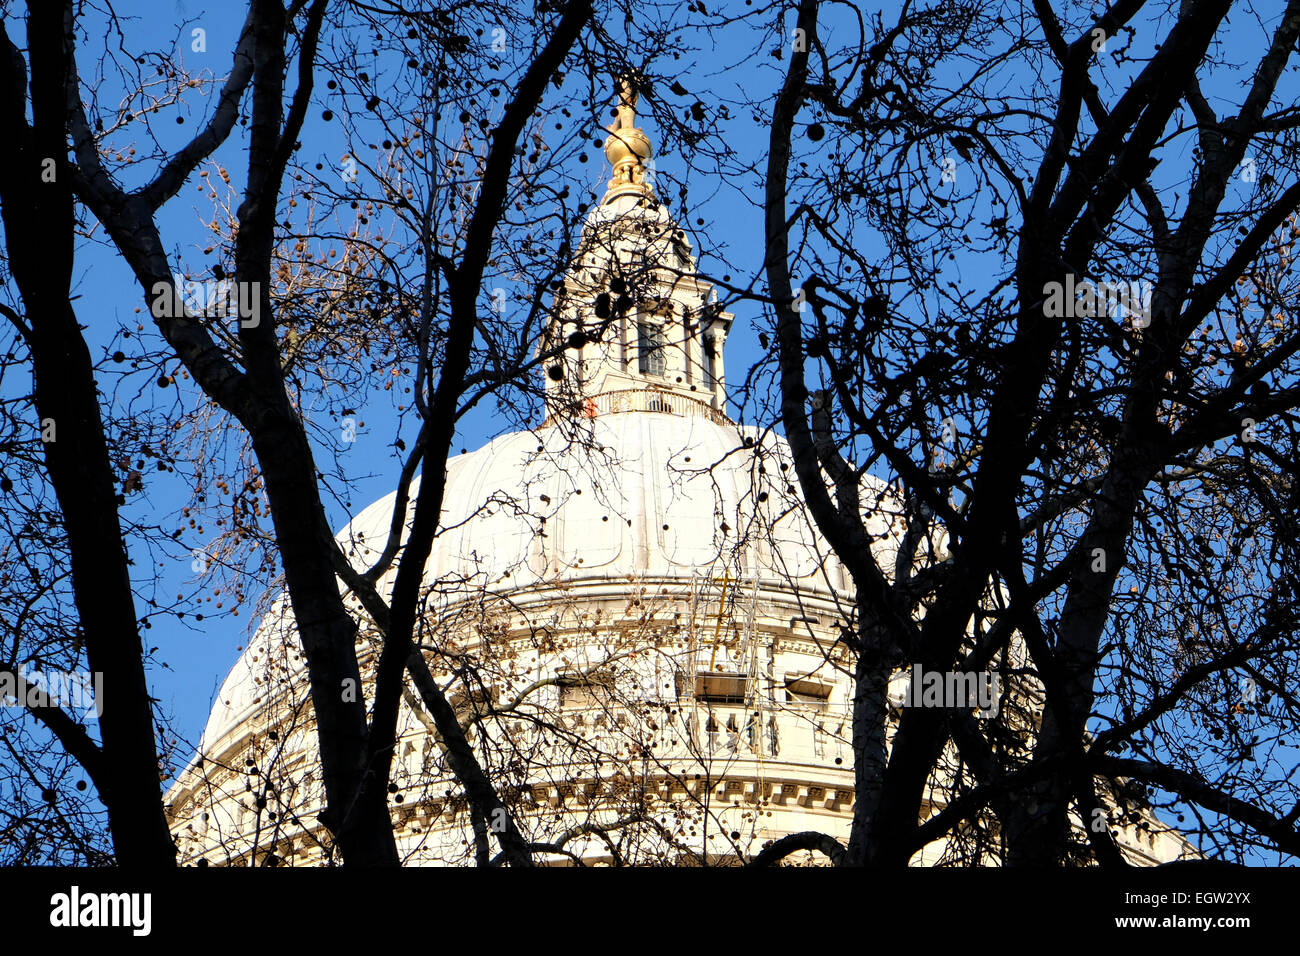 A close-up view of St Paul's cathedral dome surrounded by trees Stock Photo